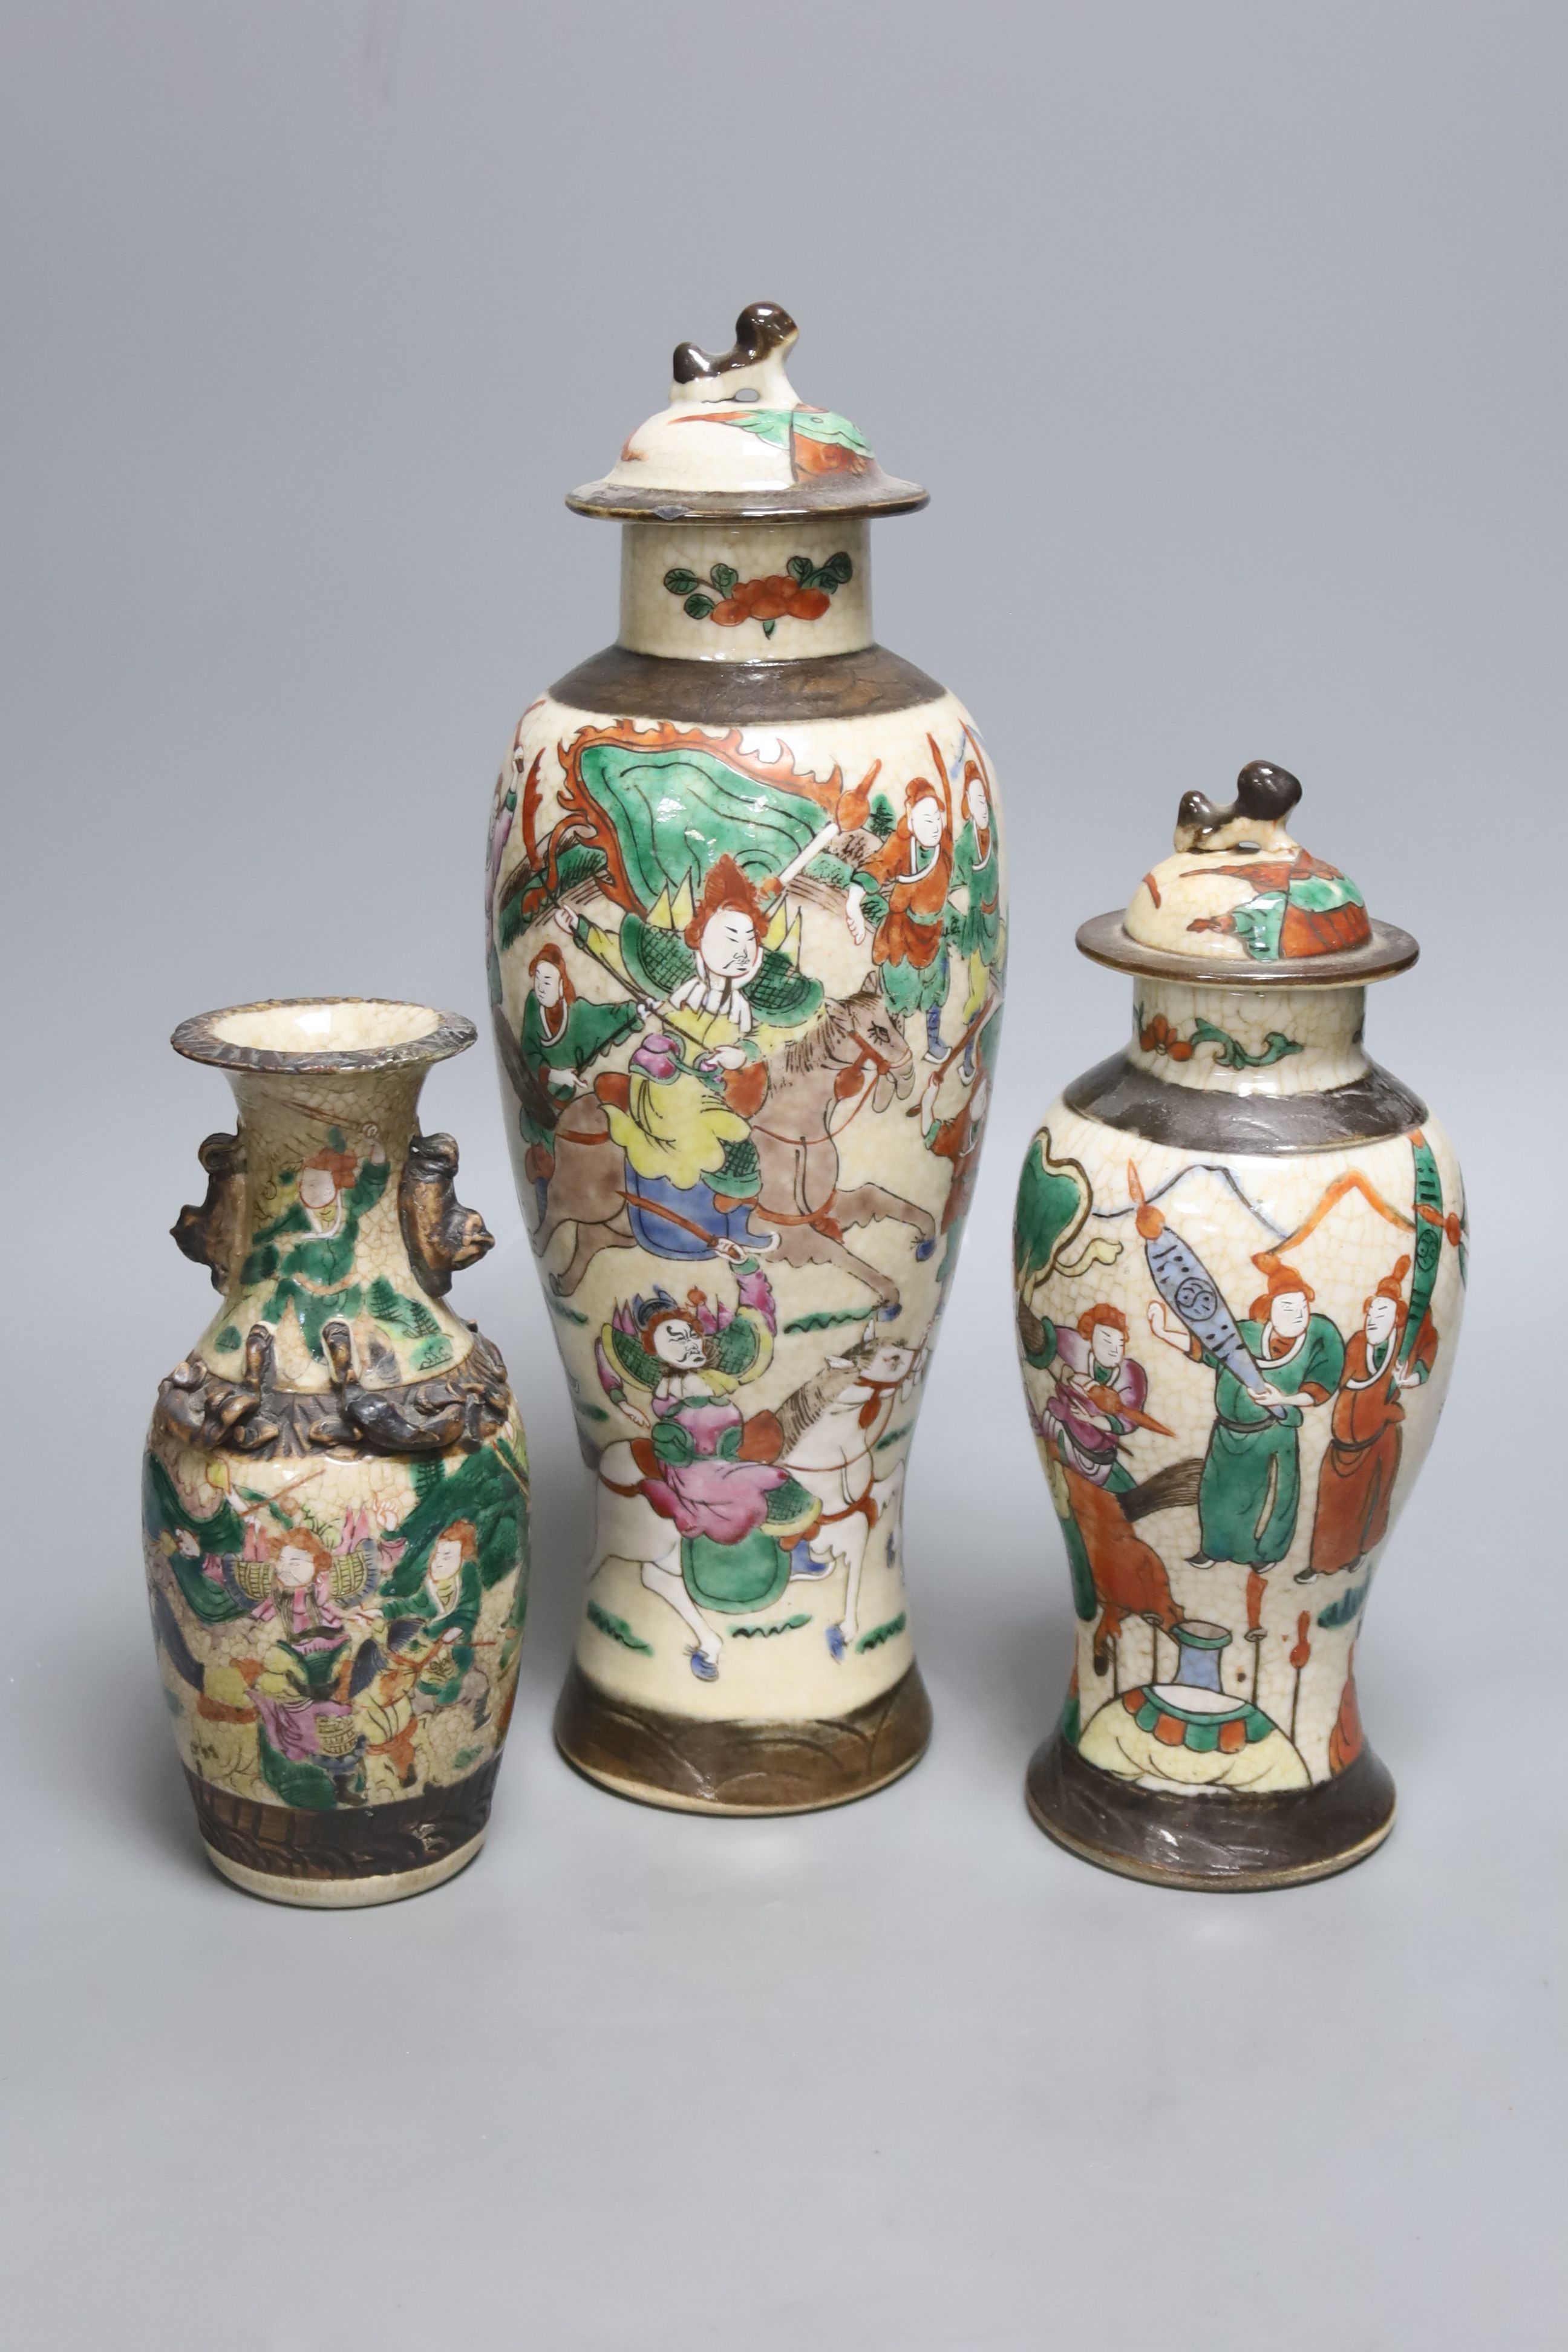 Three early 20th century Chinese crackle glaze vases, two with covers, tallest 33.5cm